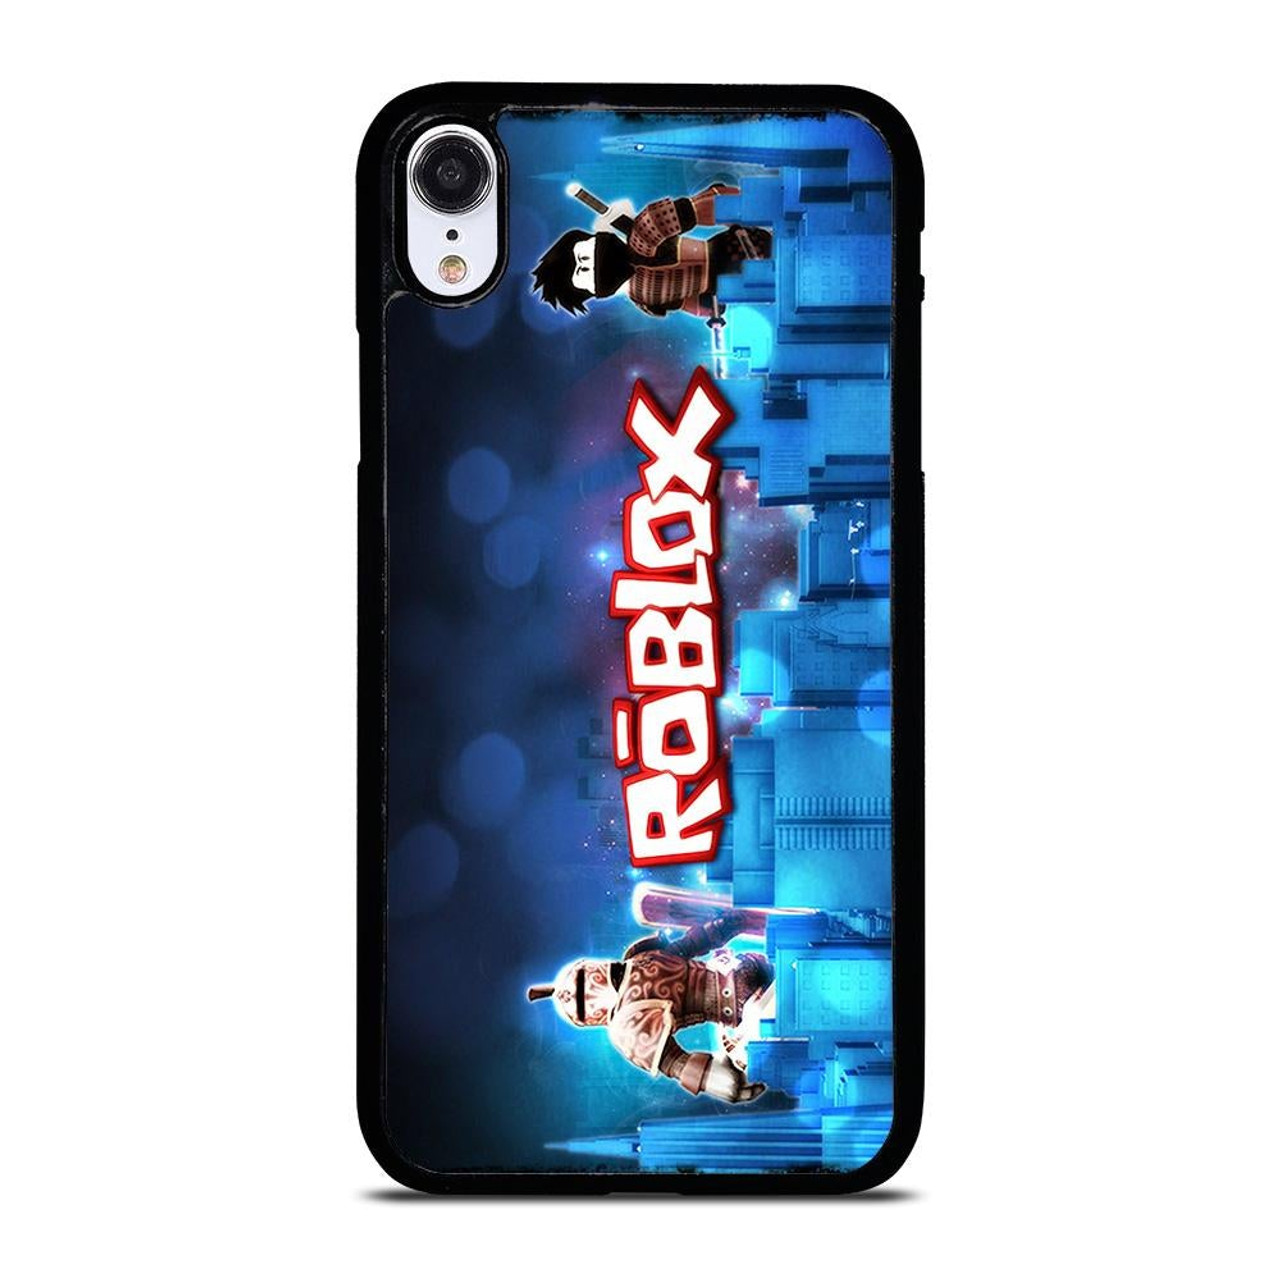 ROBLOX THE BIG BOSS GAME iPhone X / XS Case Cover